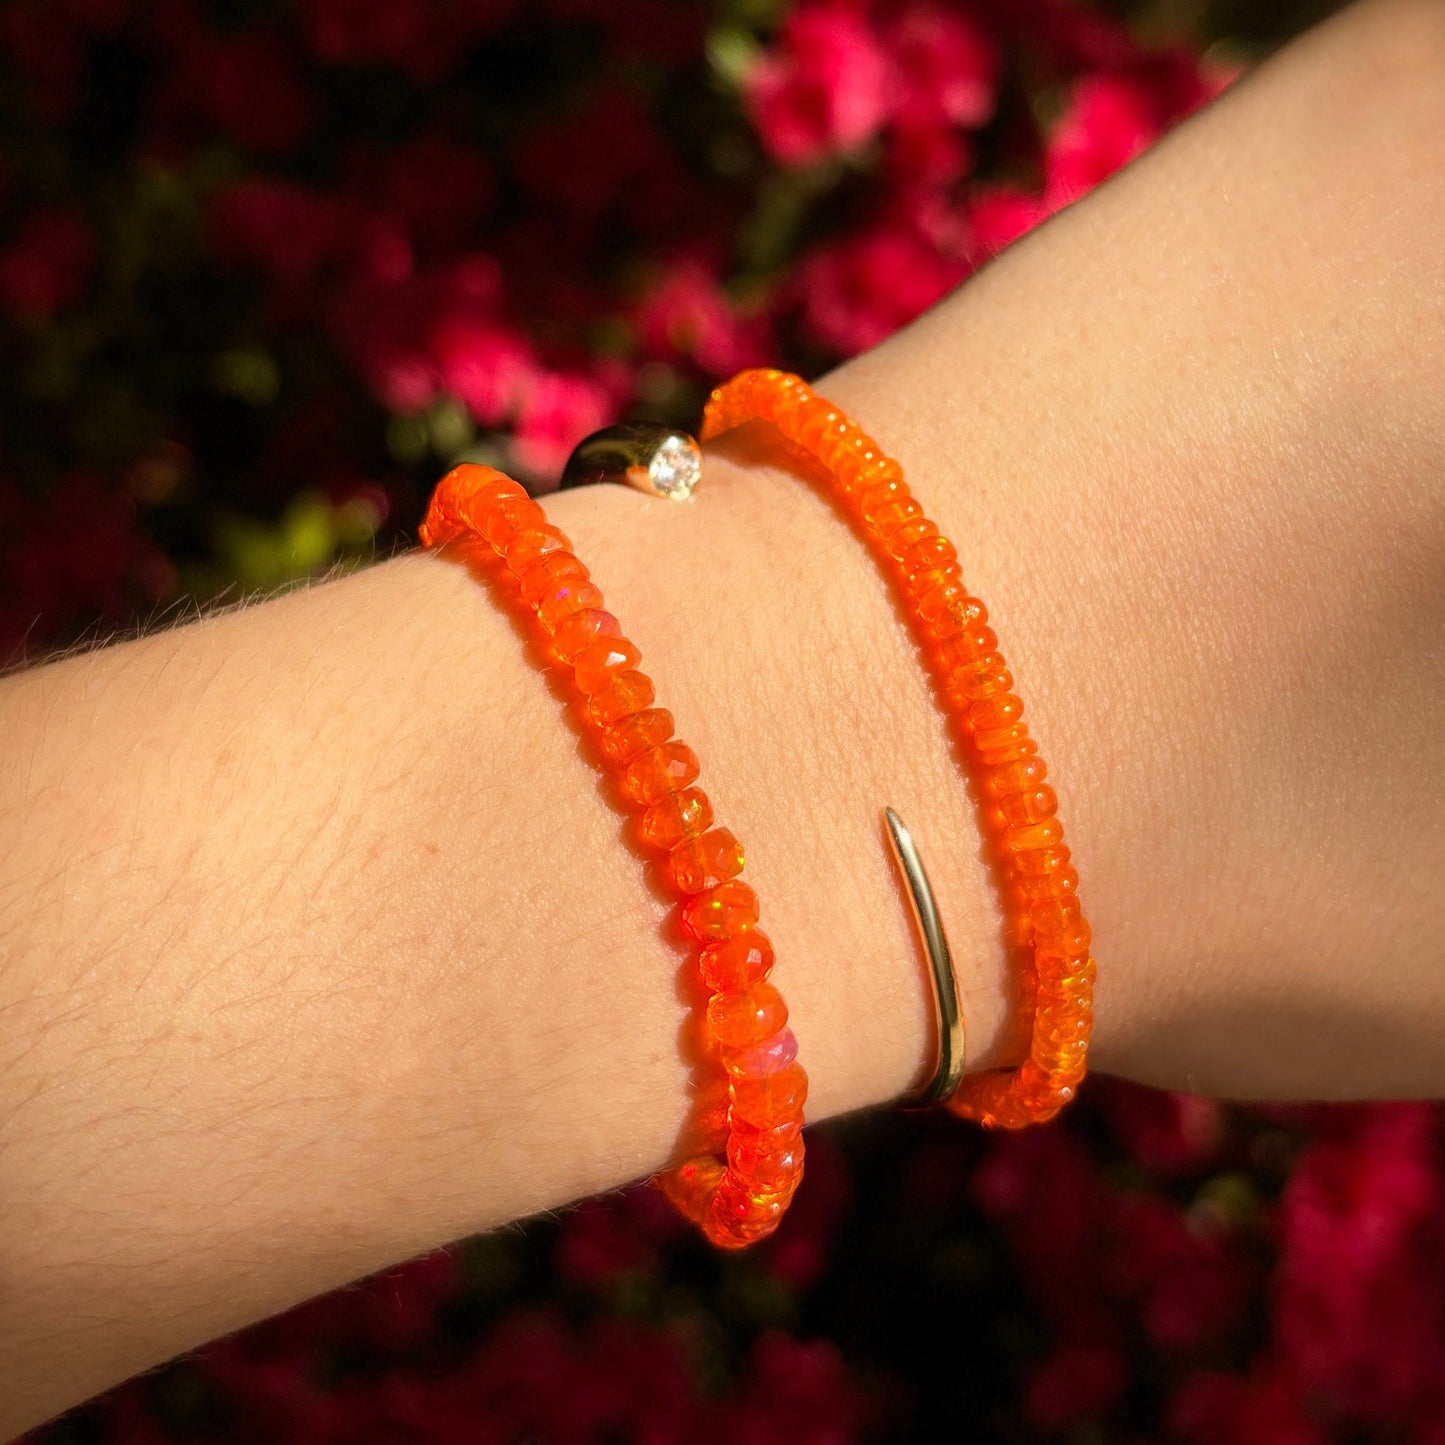 Shimmering beaded bracelet made of smooth opals in shades of bright orange on a gold linking lobster clasp styled on a wrist.